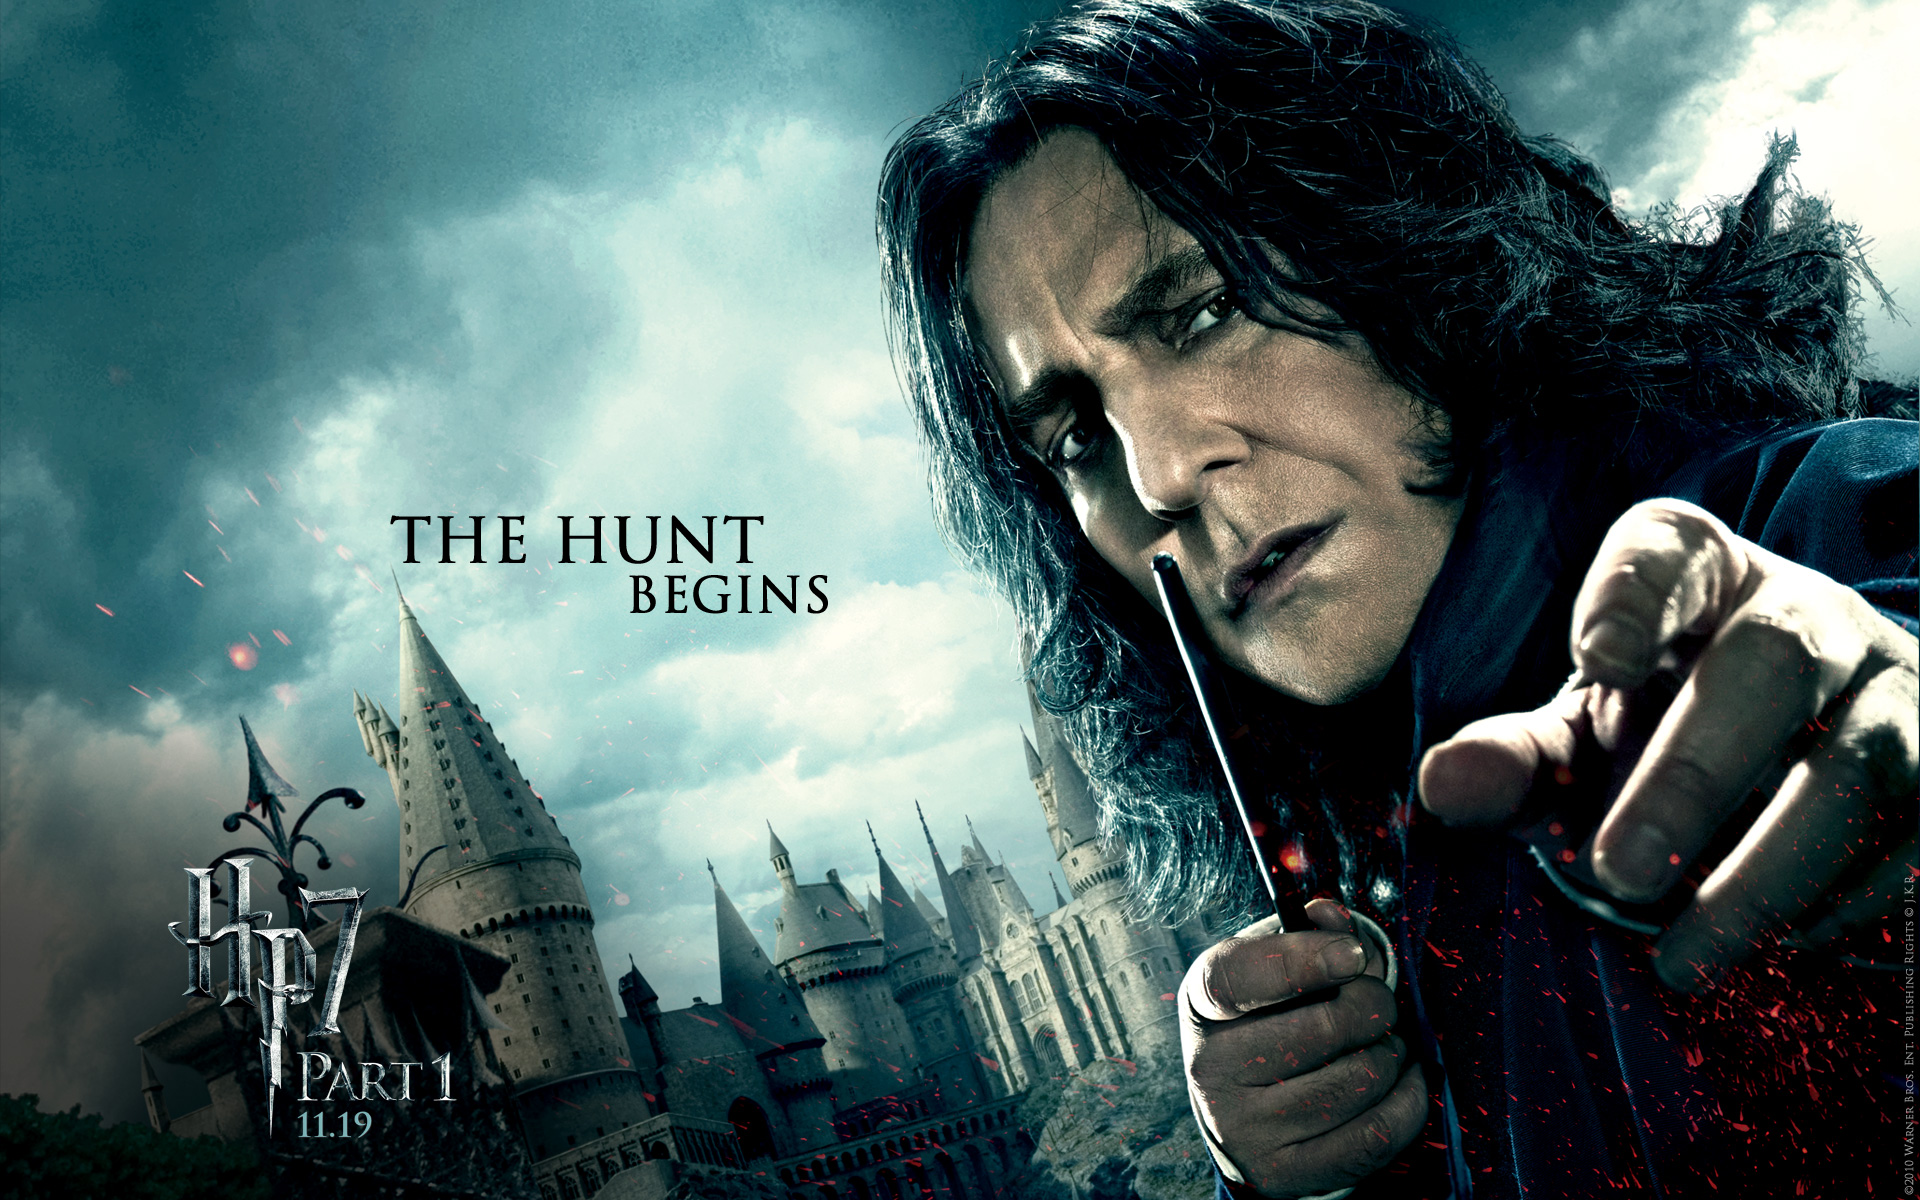 Harry Potter Harry Potter And The Deathly Hallows Severus Snape Cyan 1920x1200